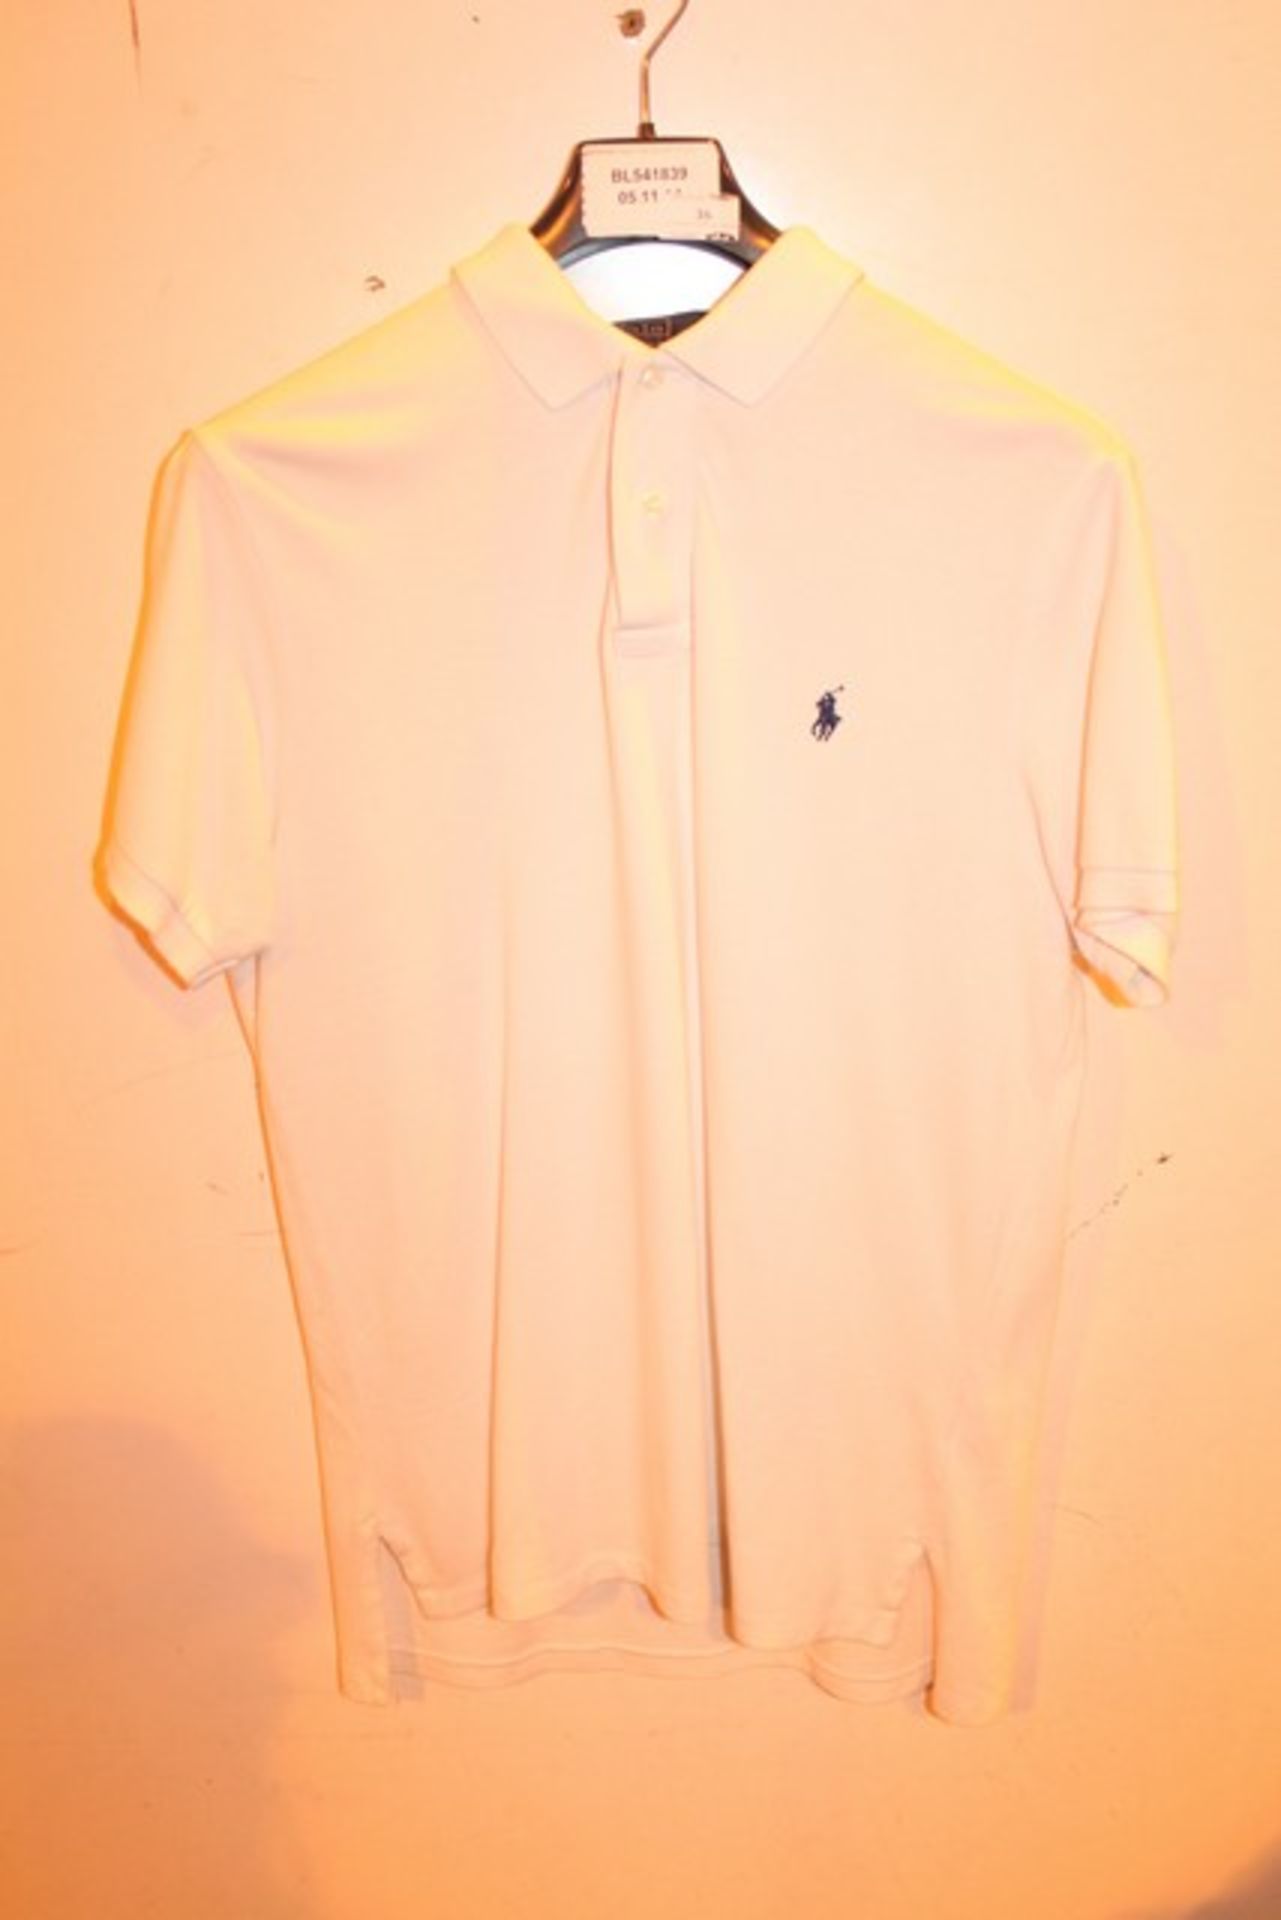 1 x SIZE LARGE POLO RALPH LAUREN CUSTOM FIT WHITE POLO NECK TSHIRT (541839)  *PLEASE NOTE THAT THE